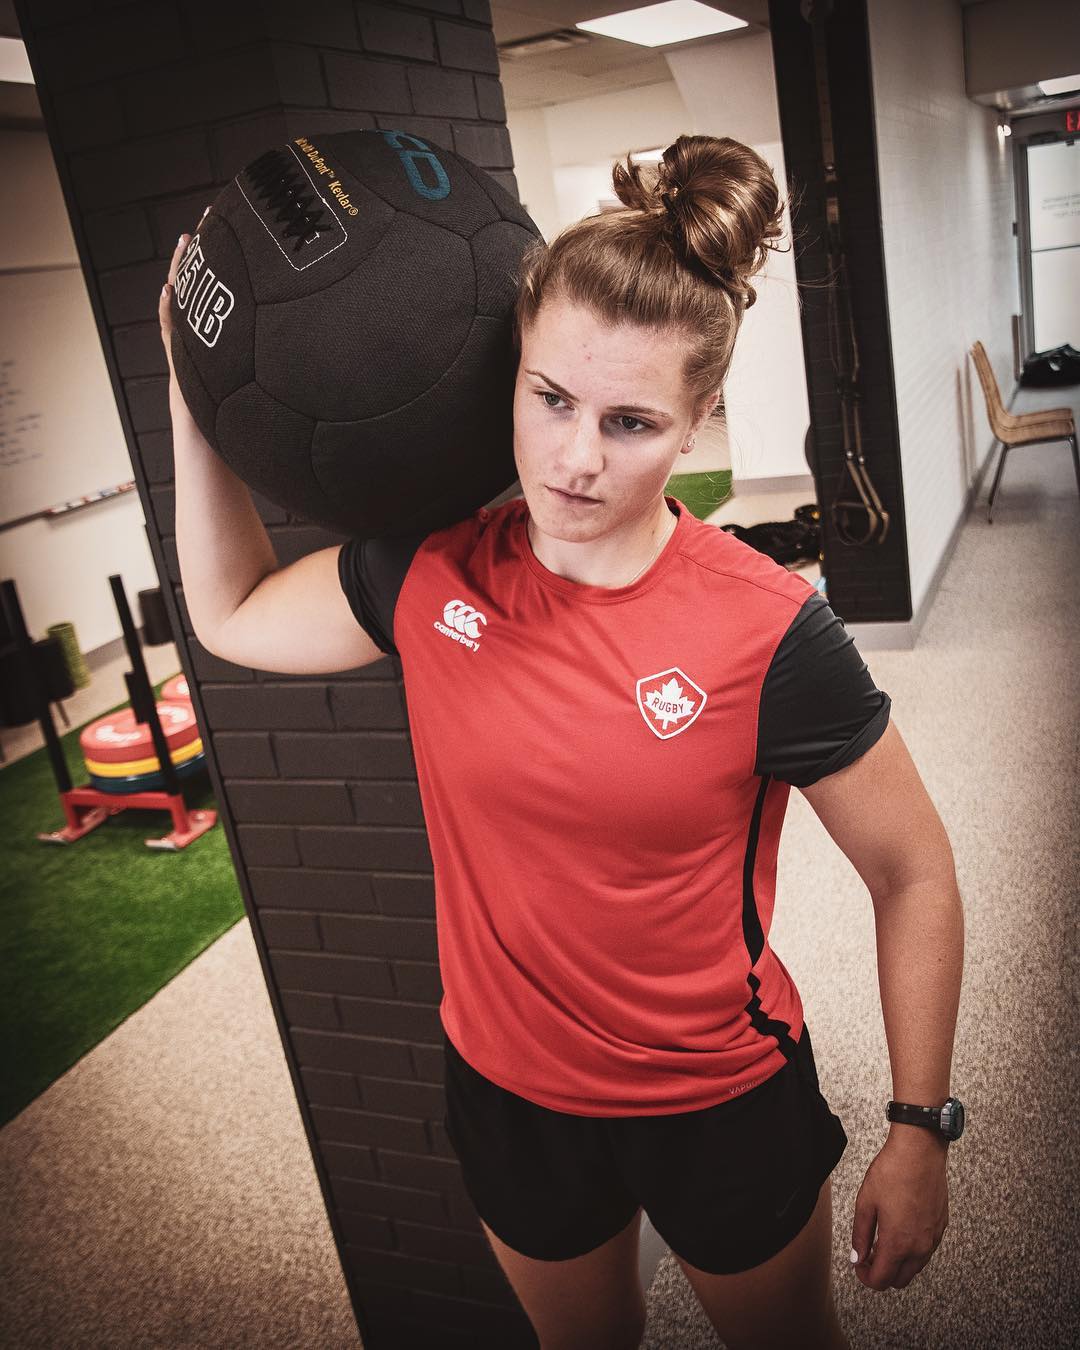 Congrats on your 4 month post-op ACL milestone!! One of the most hardworking and focused athletes to walk through our doors! 👊🏼 @mckinley_hunt @rugbycanada 🇨🇦🏉 #rugbyCA #scrumallday